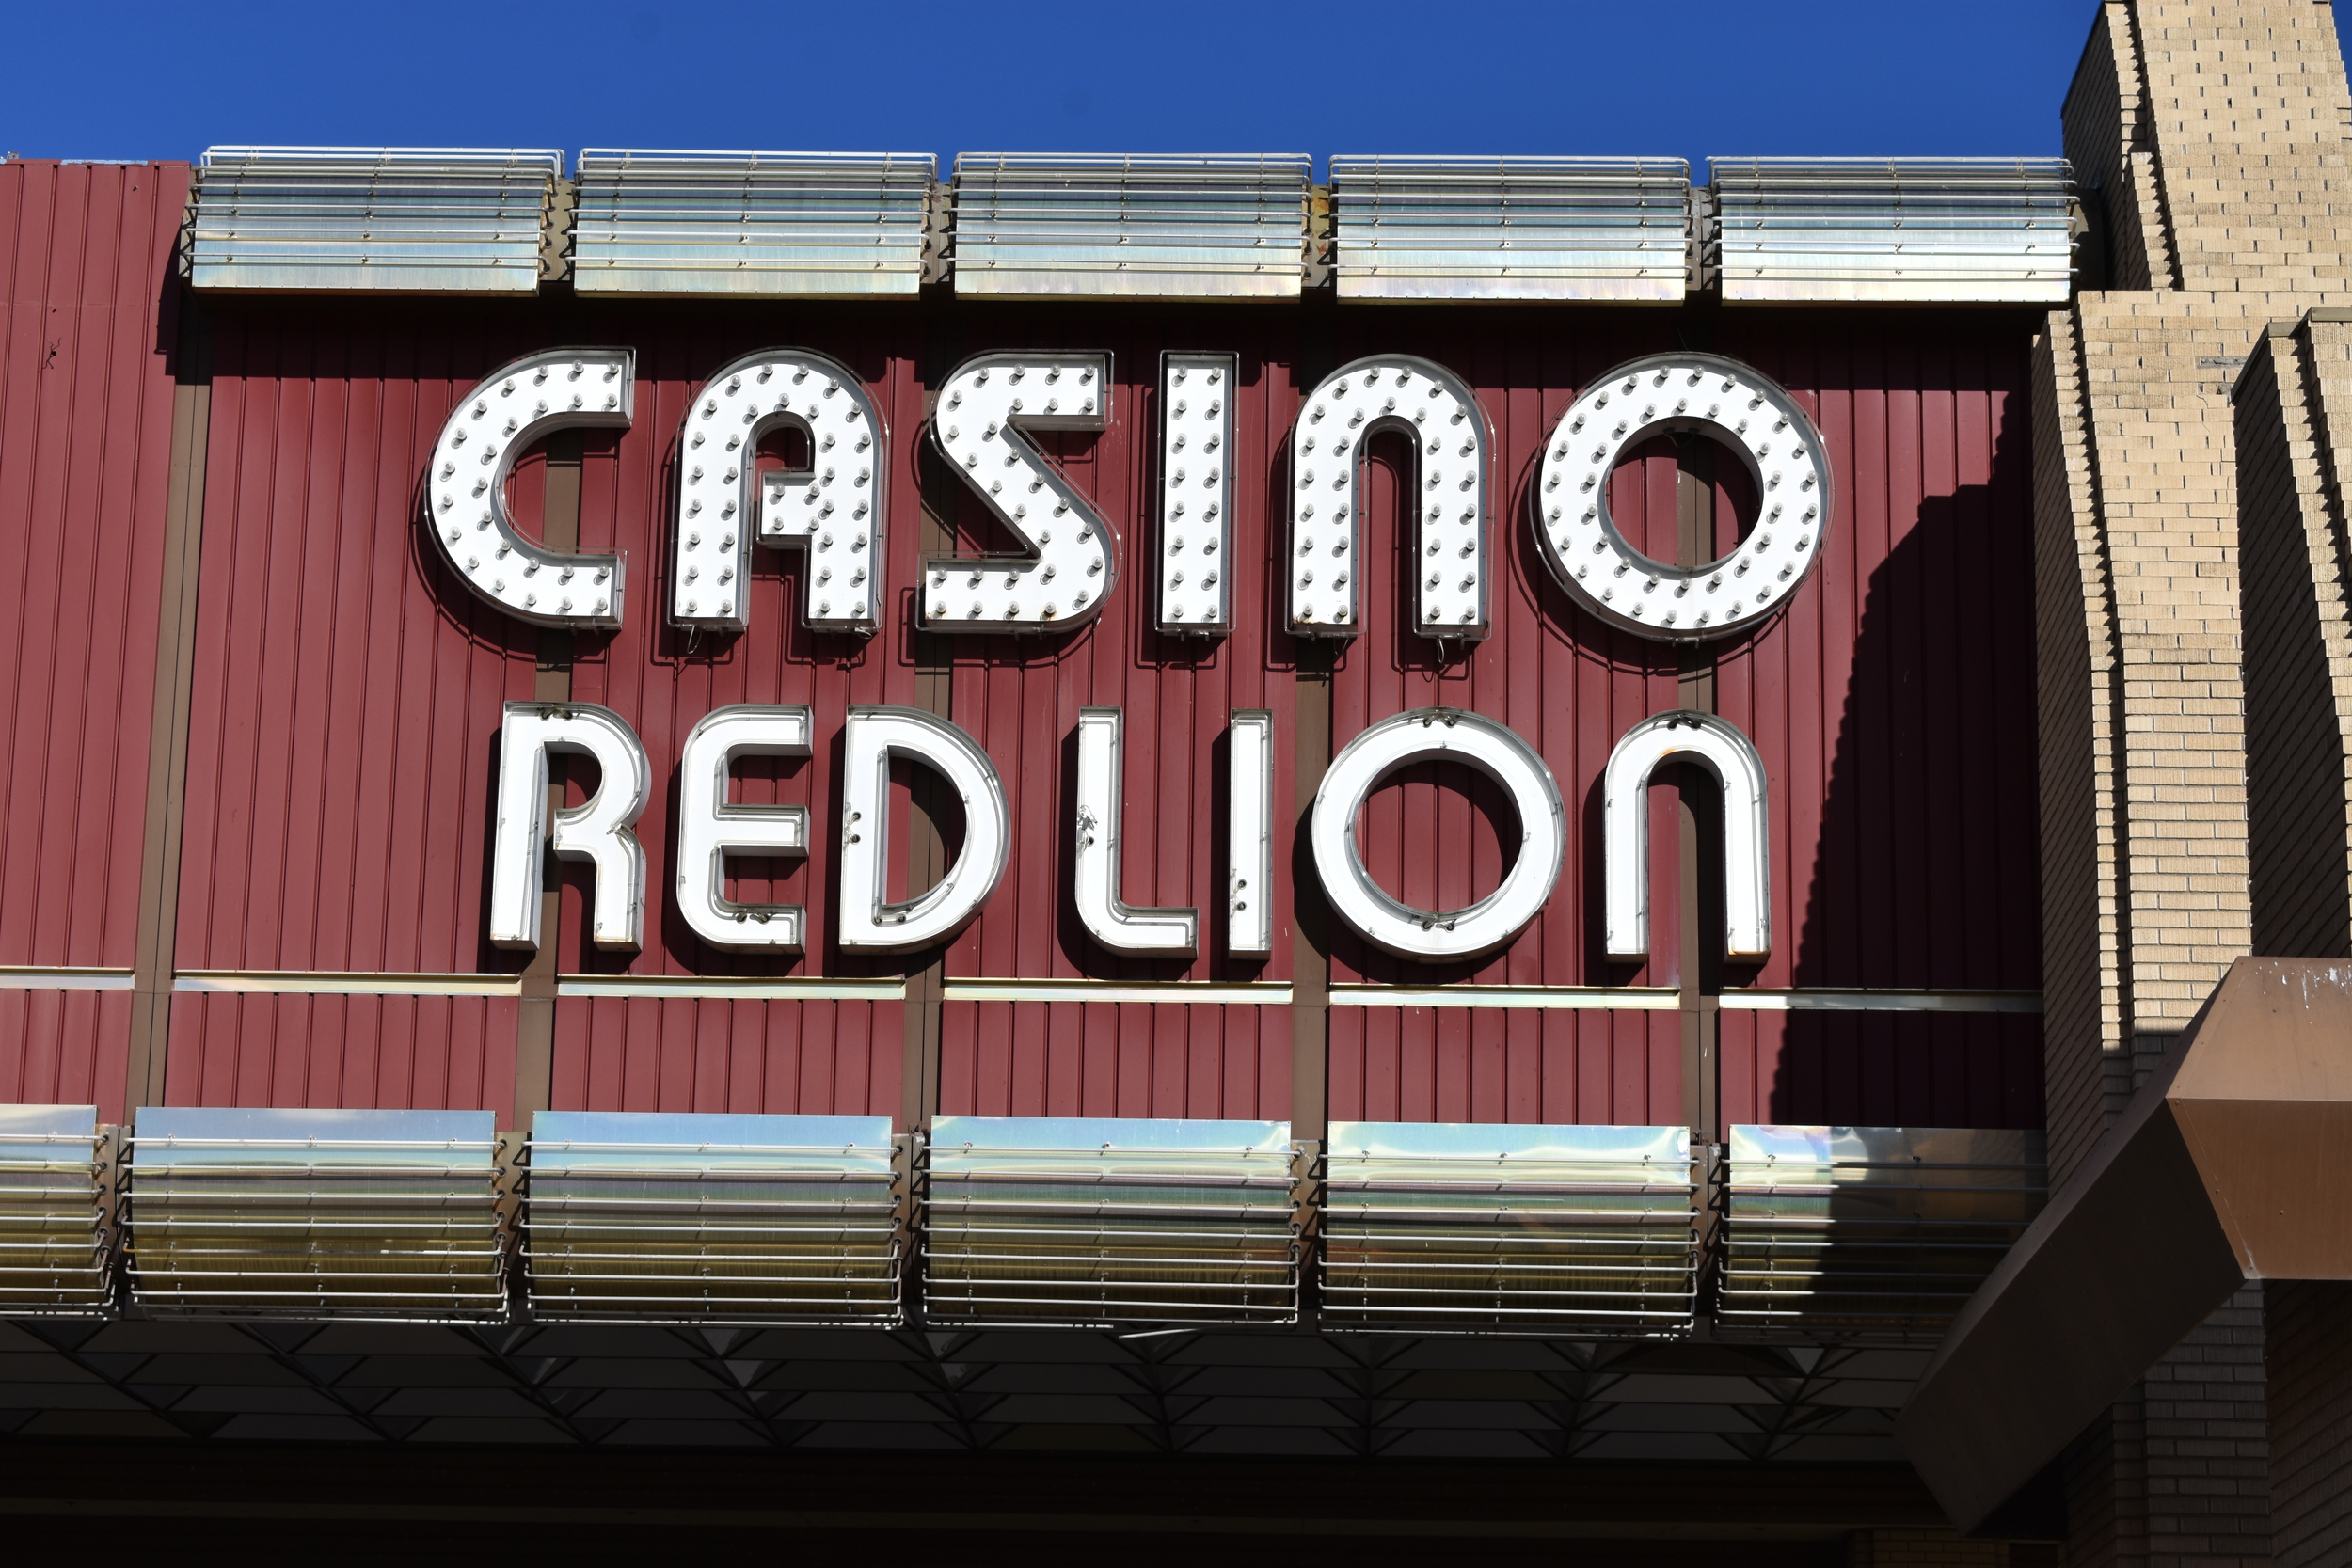 Red Lion Casino wall mounted signs, Elko, Nevada